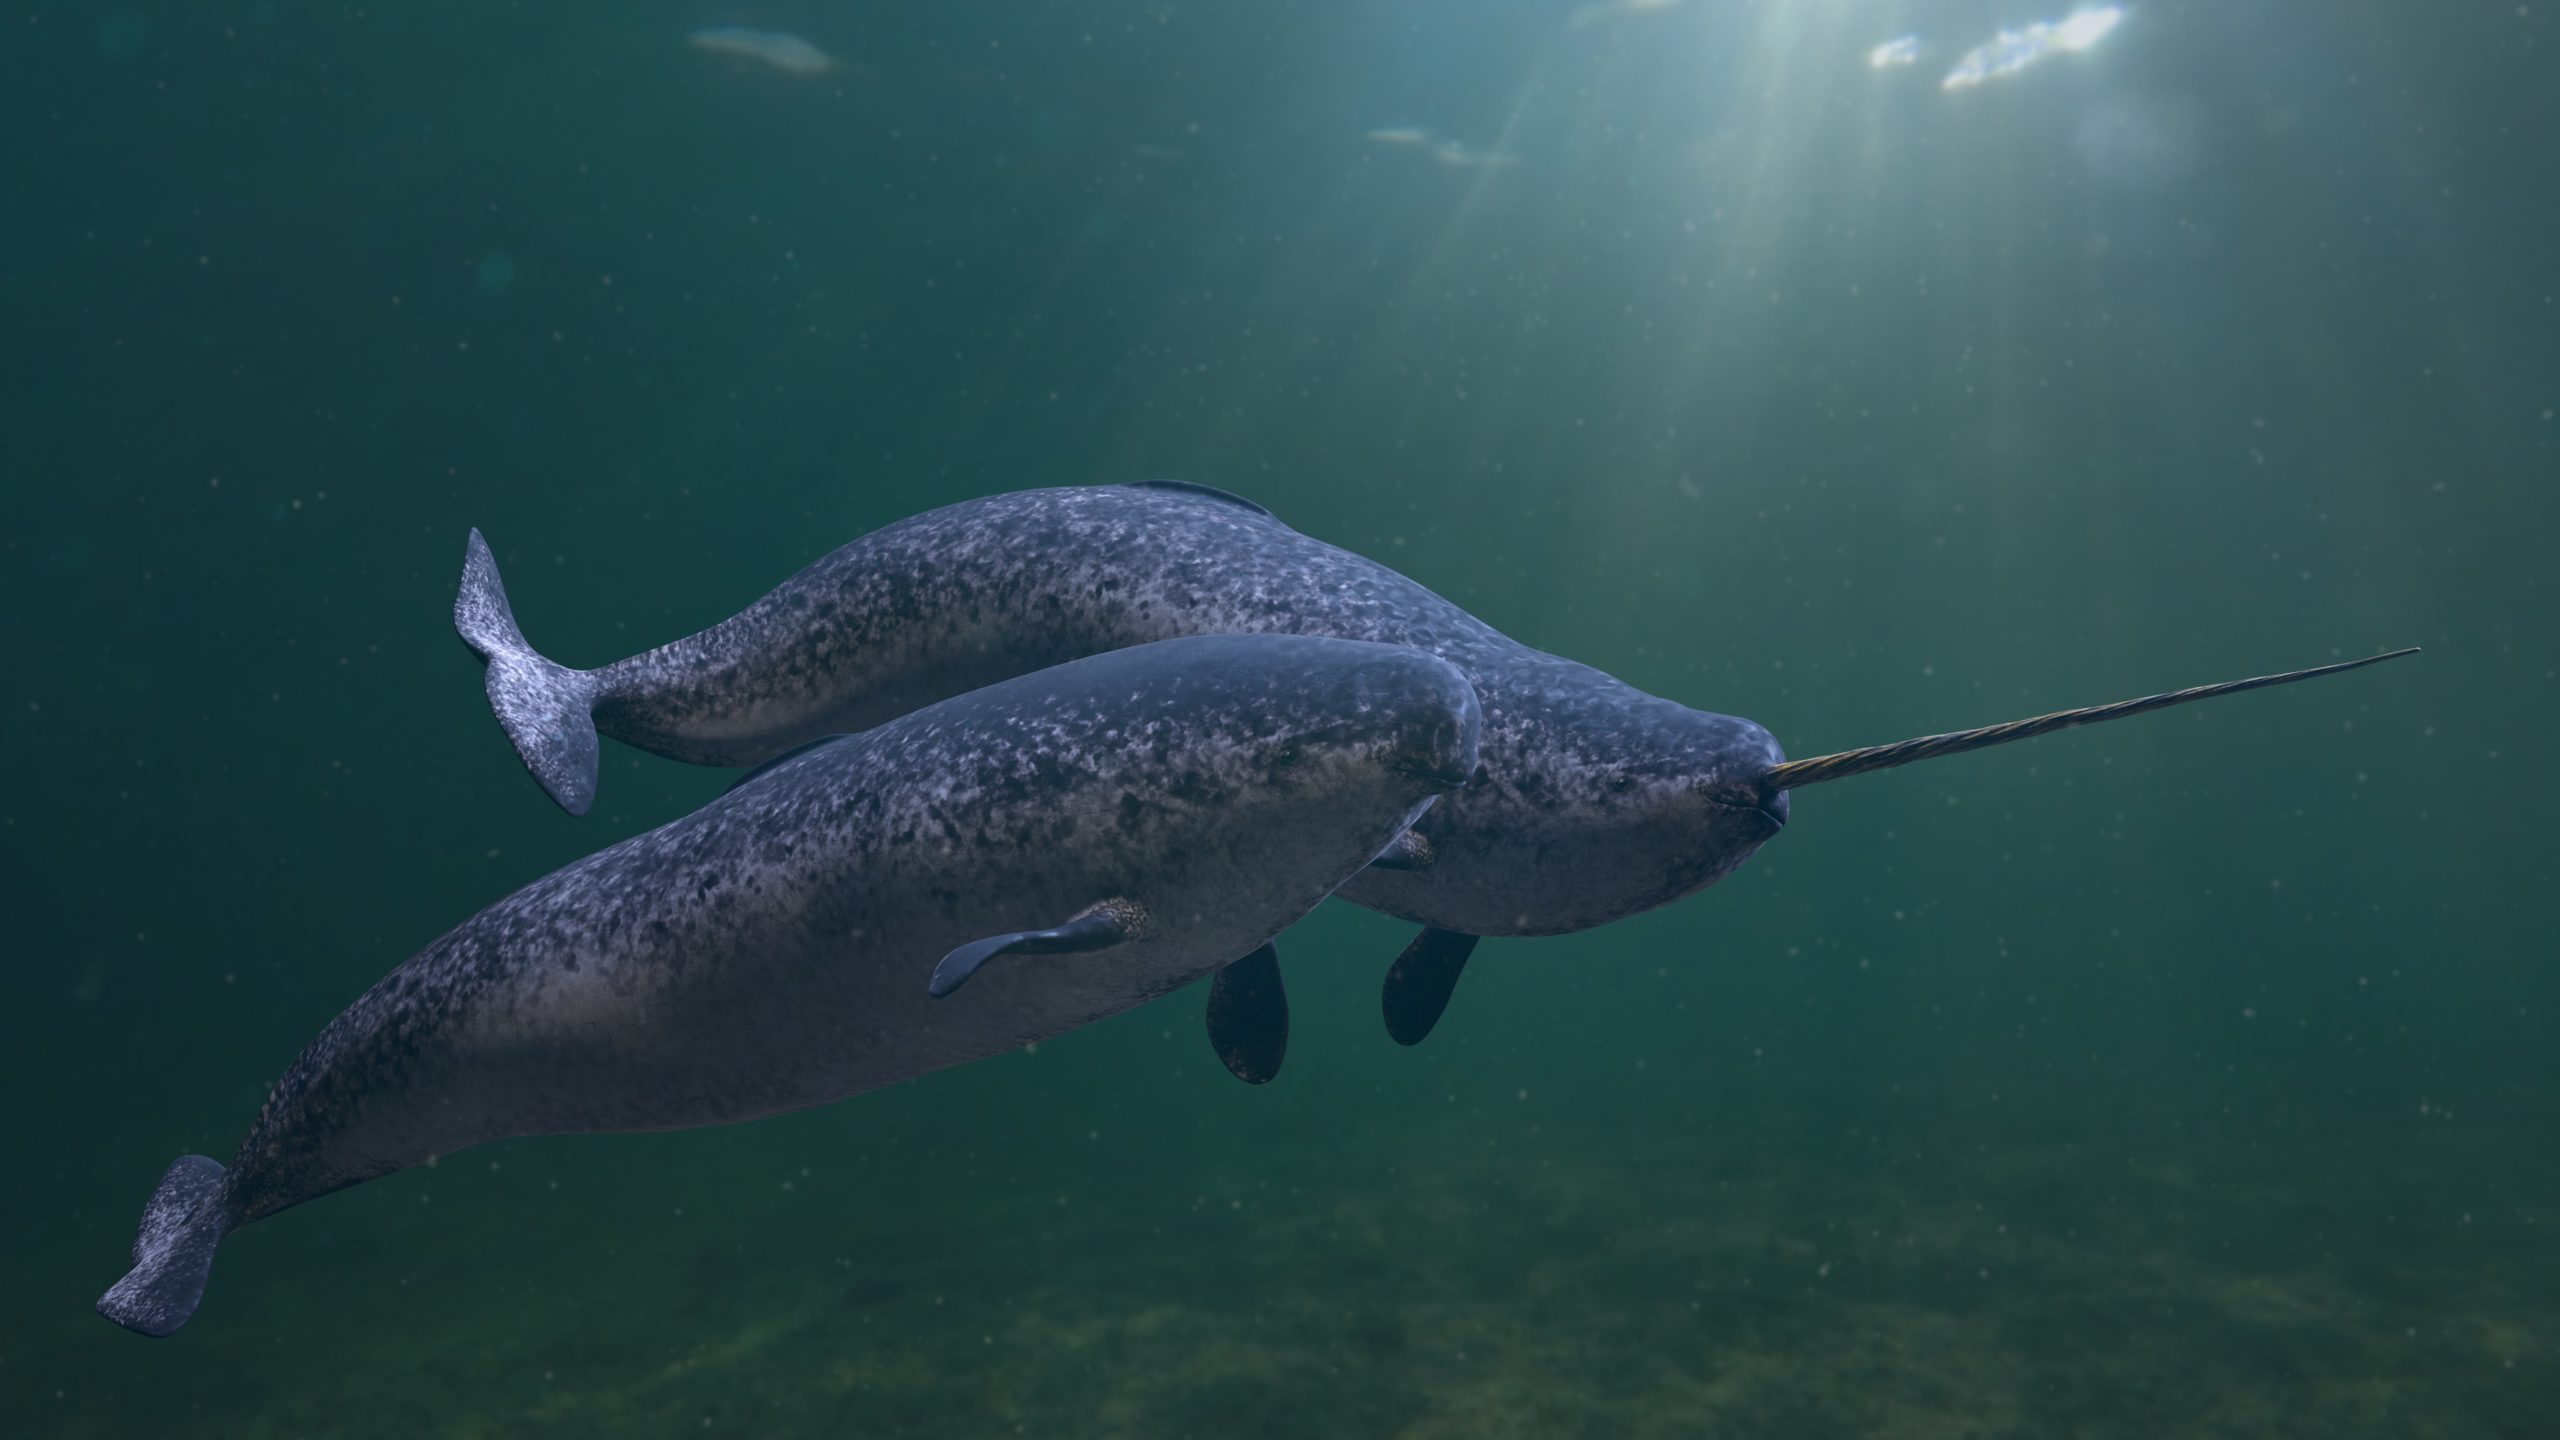 The tooth sprouts right through the narwhal's lip. (Image: dottedhippo, Getty Images)